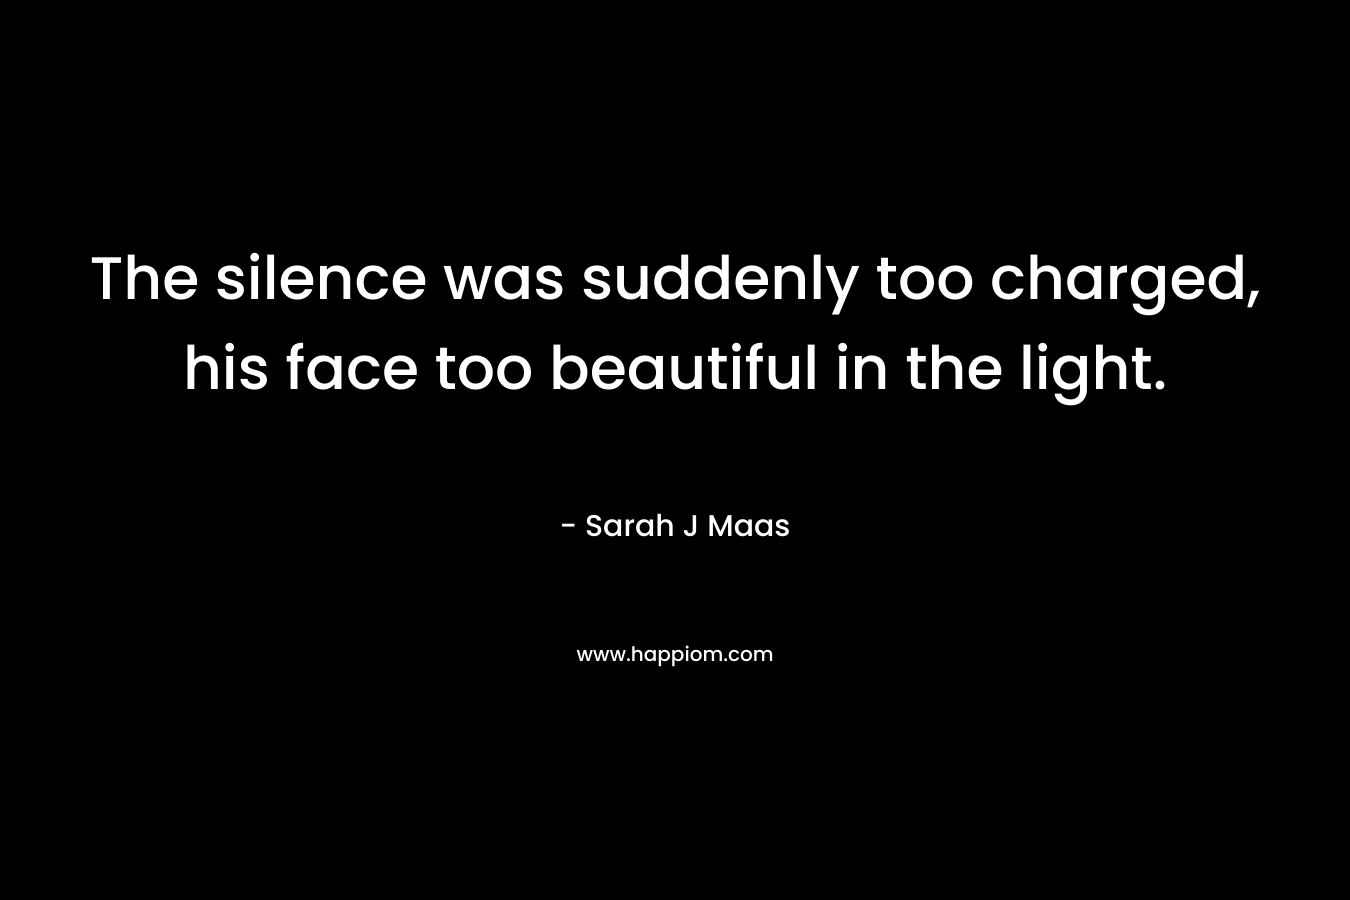 The silence was suddenly too charged, his face too beautiful in the light.